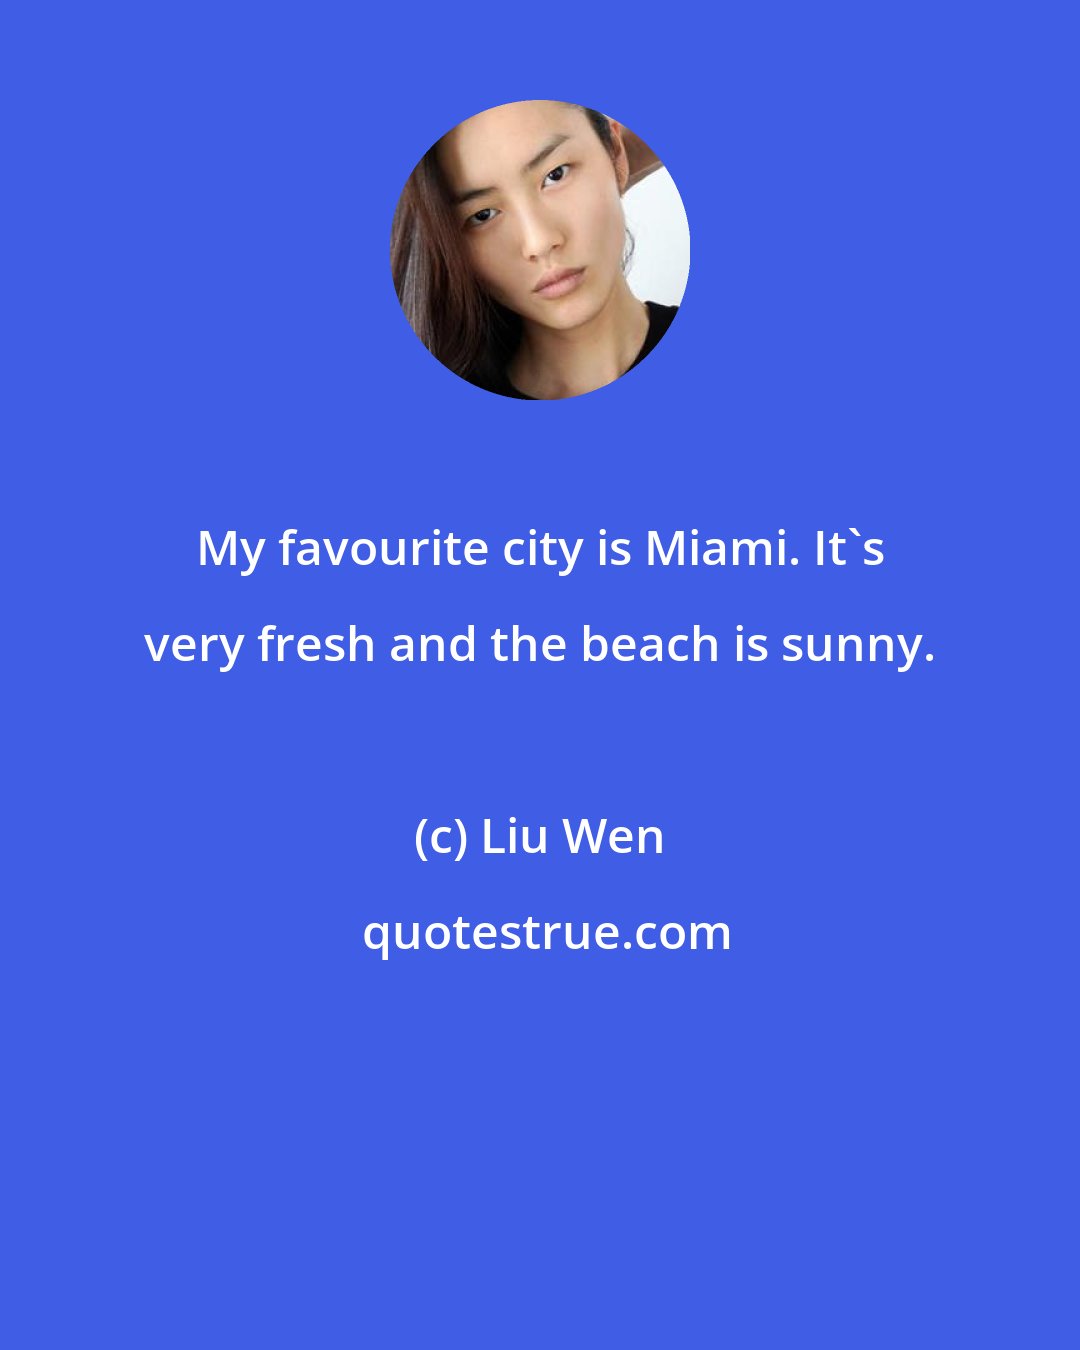 Liu Wen: My favourite city is Miami. It's very fresh and the beach is sunny.